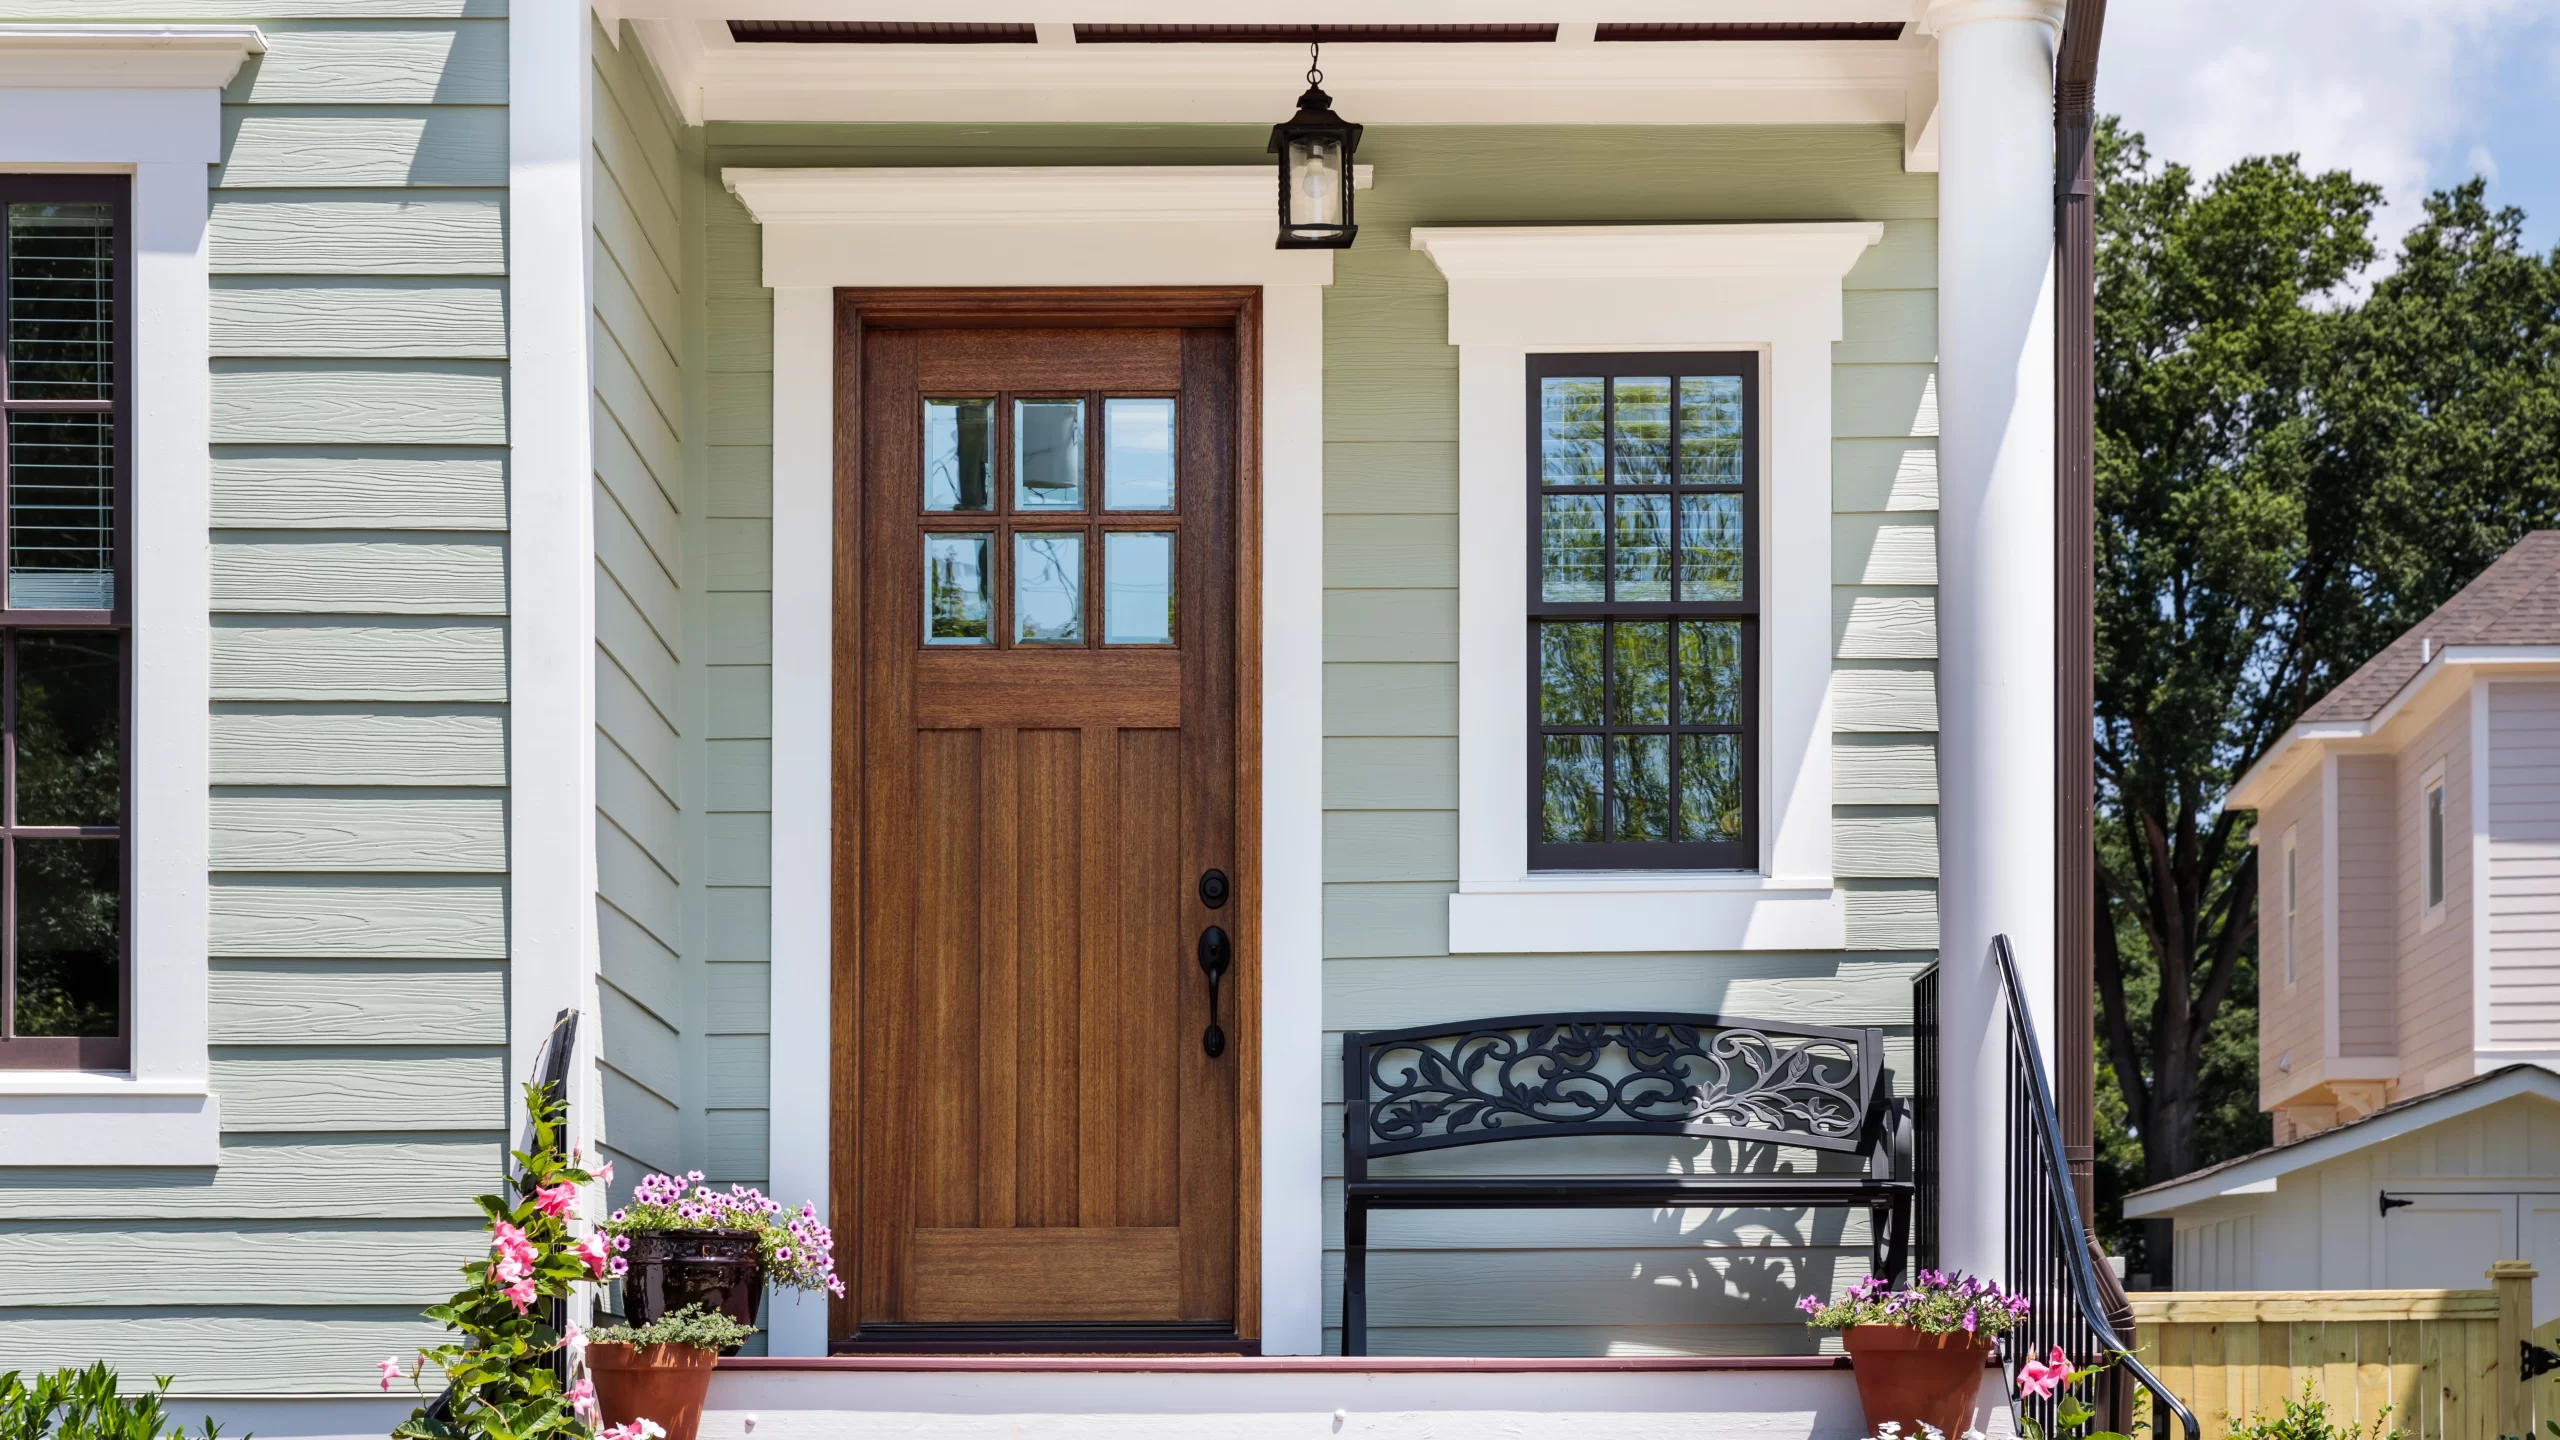 The front of a green-sided home with white trim and a brown wood entry door